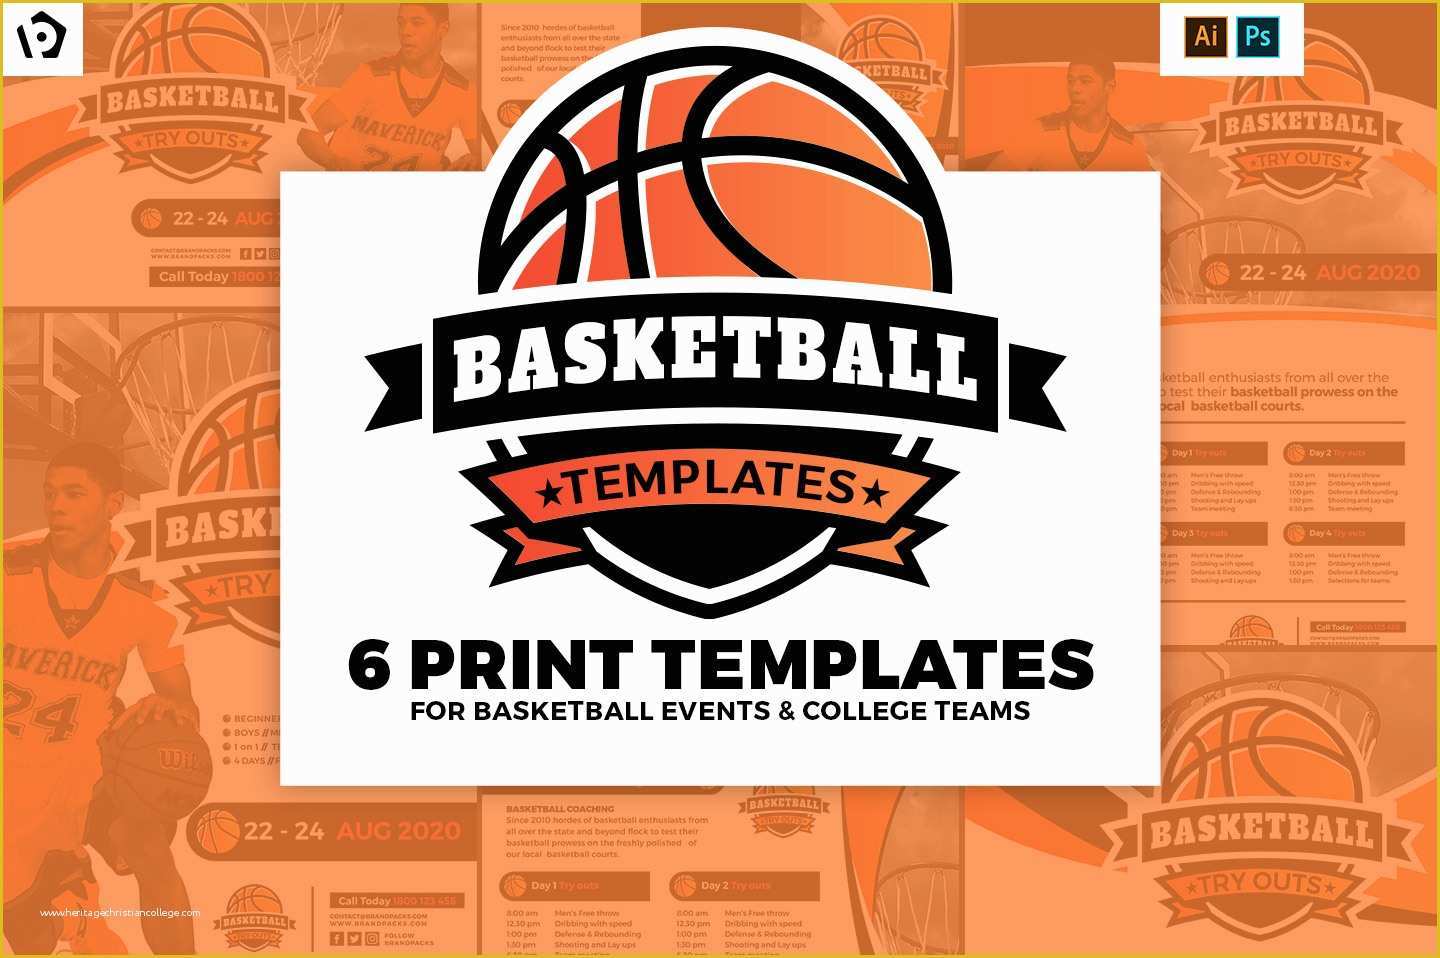 Free Basketball Website Templates Of Basketball Templates Pack for Shop & Illustrator